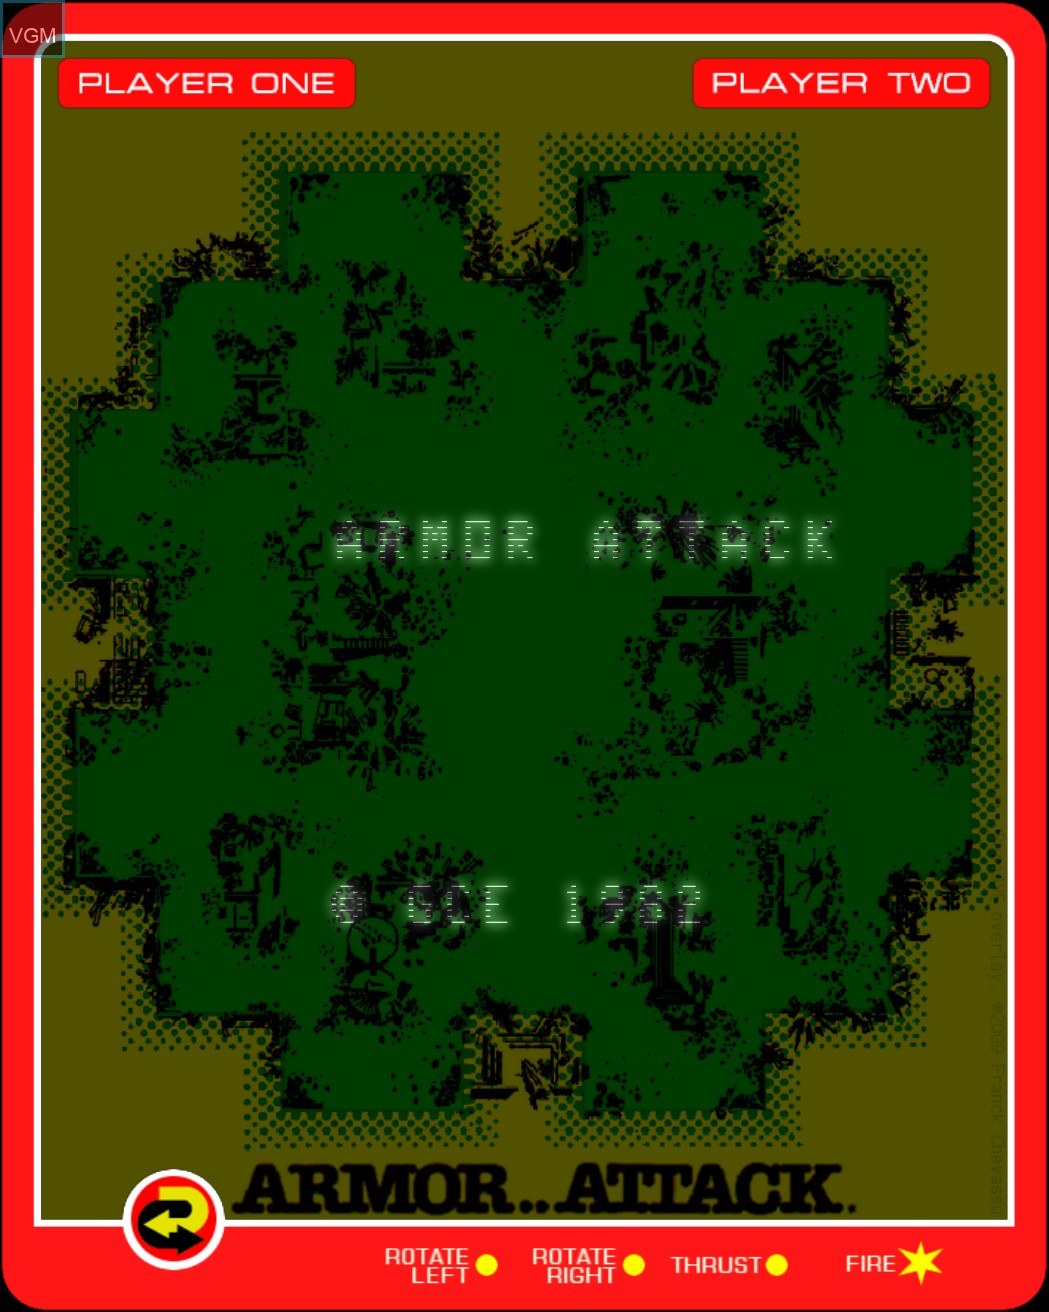 Title screen of the game Armor..Attack on MB Vectrex